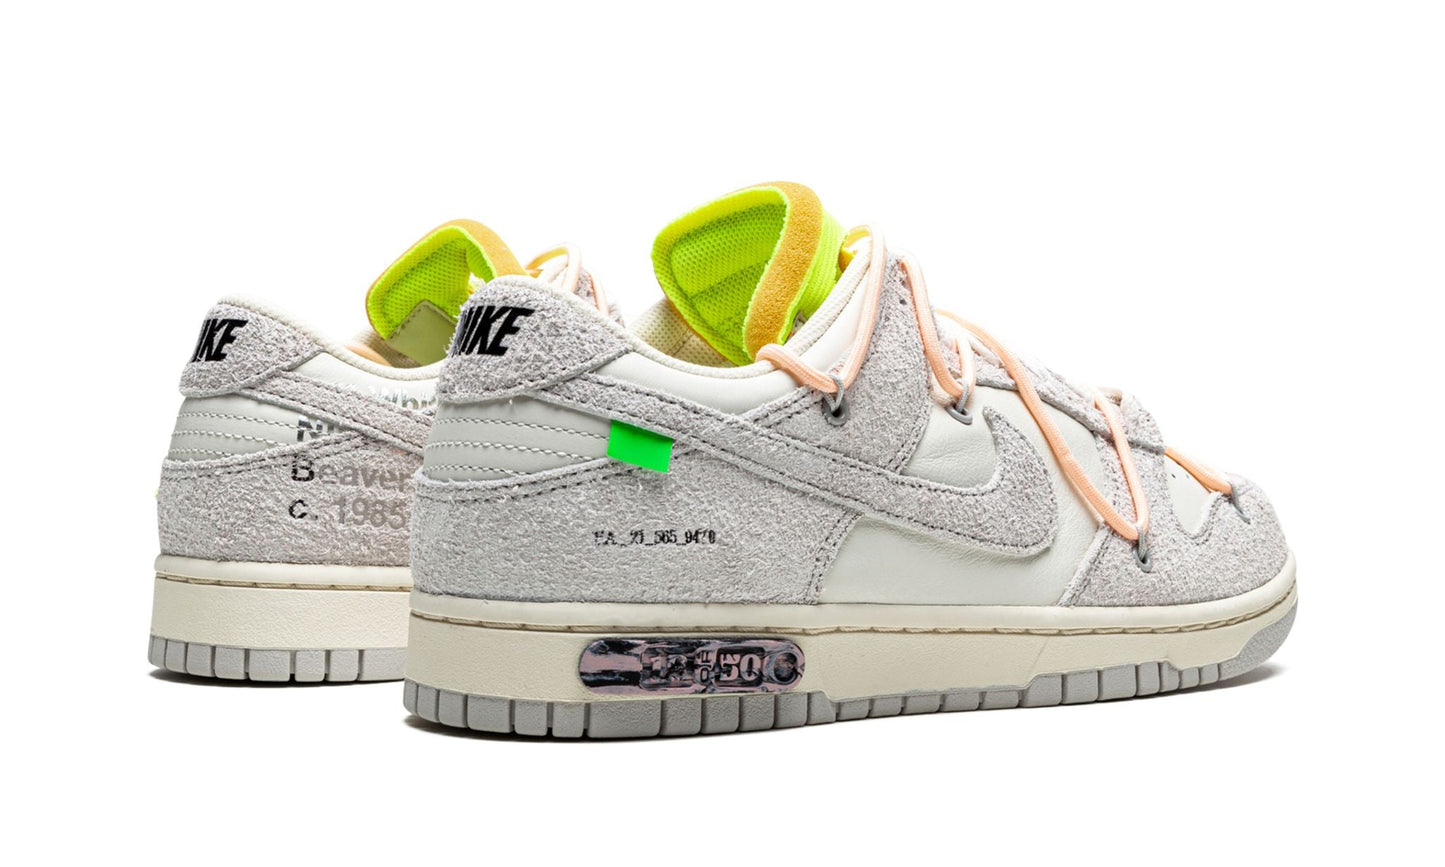 NIKE X OFF-WHITE DUNK LOW "Off-White - Lot 12"